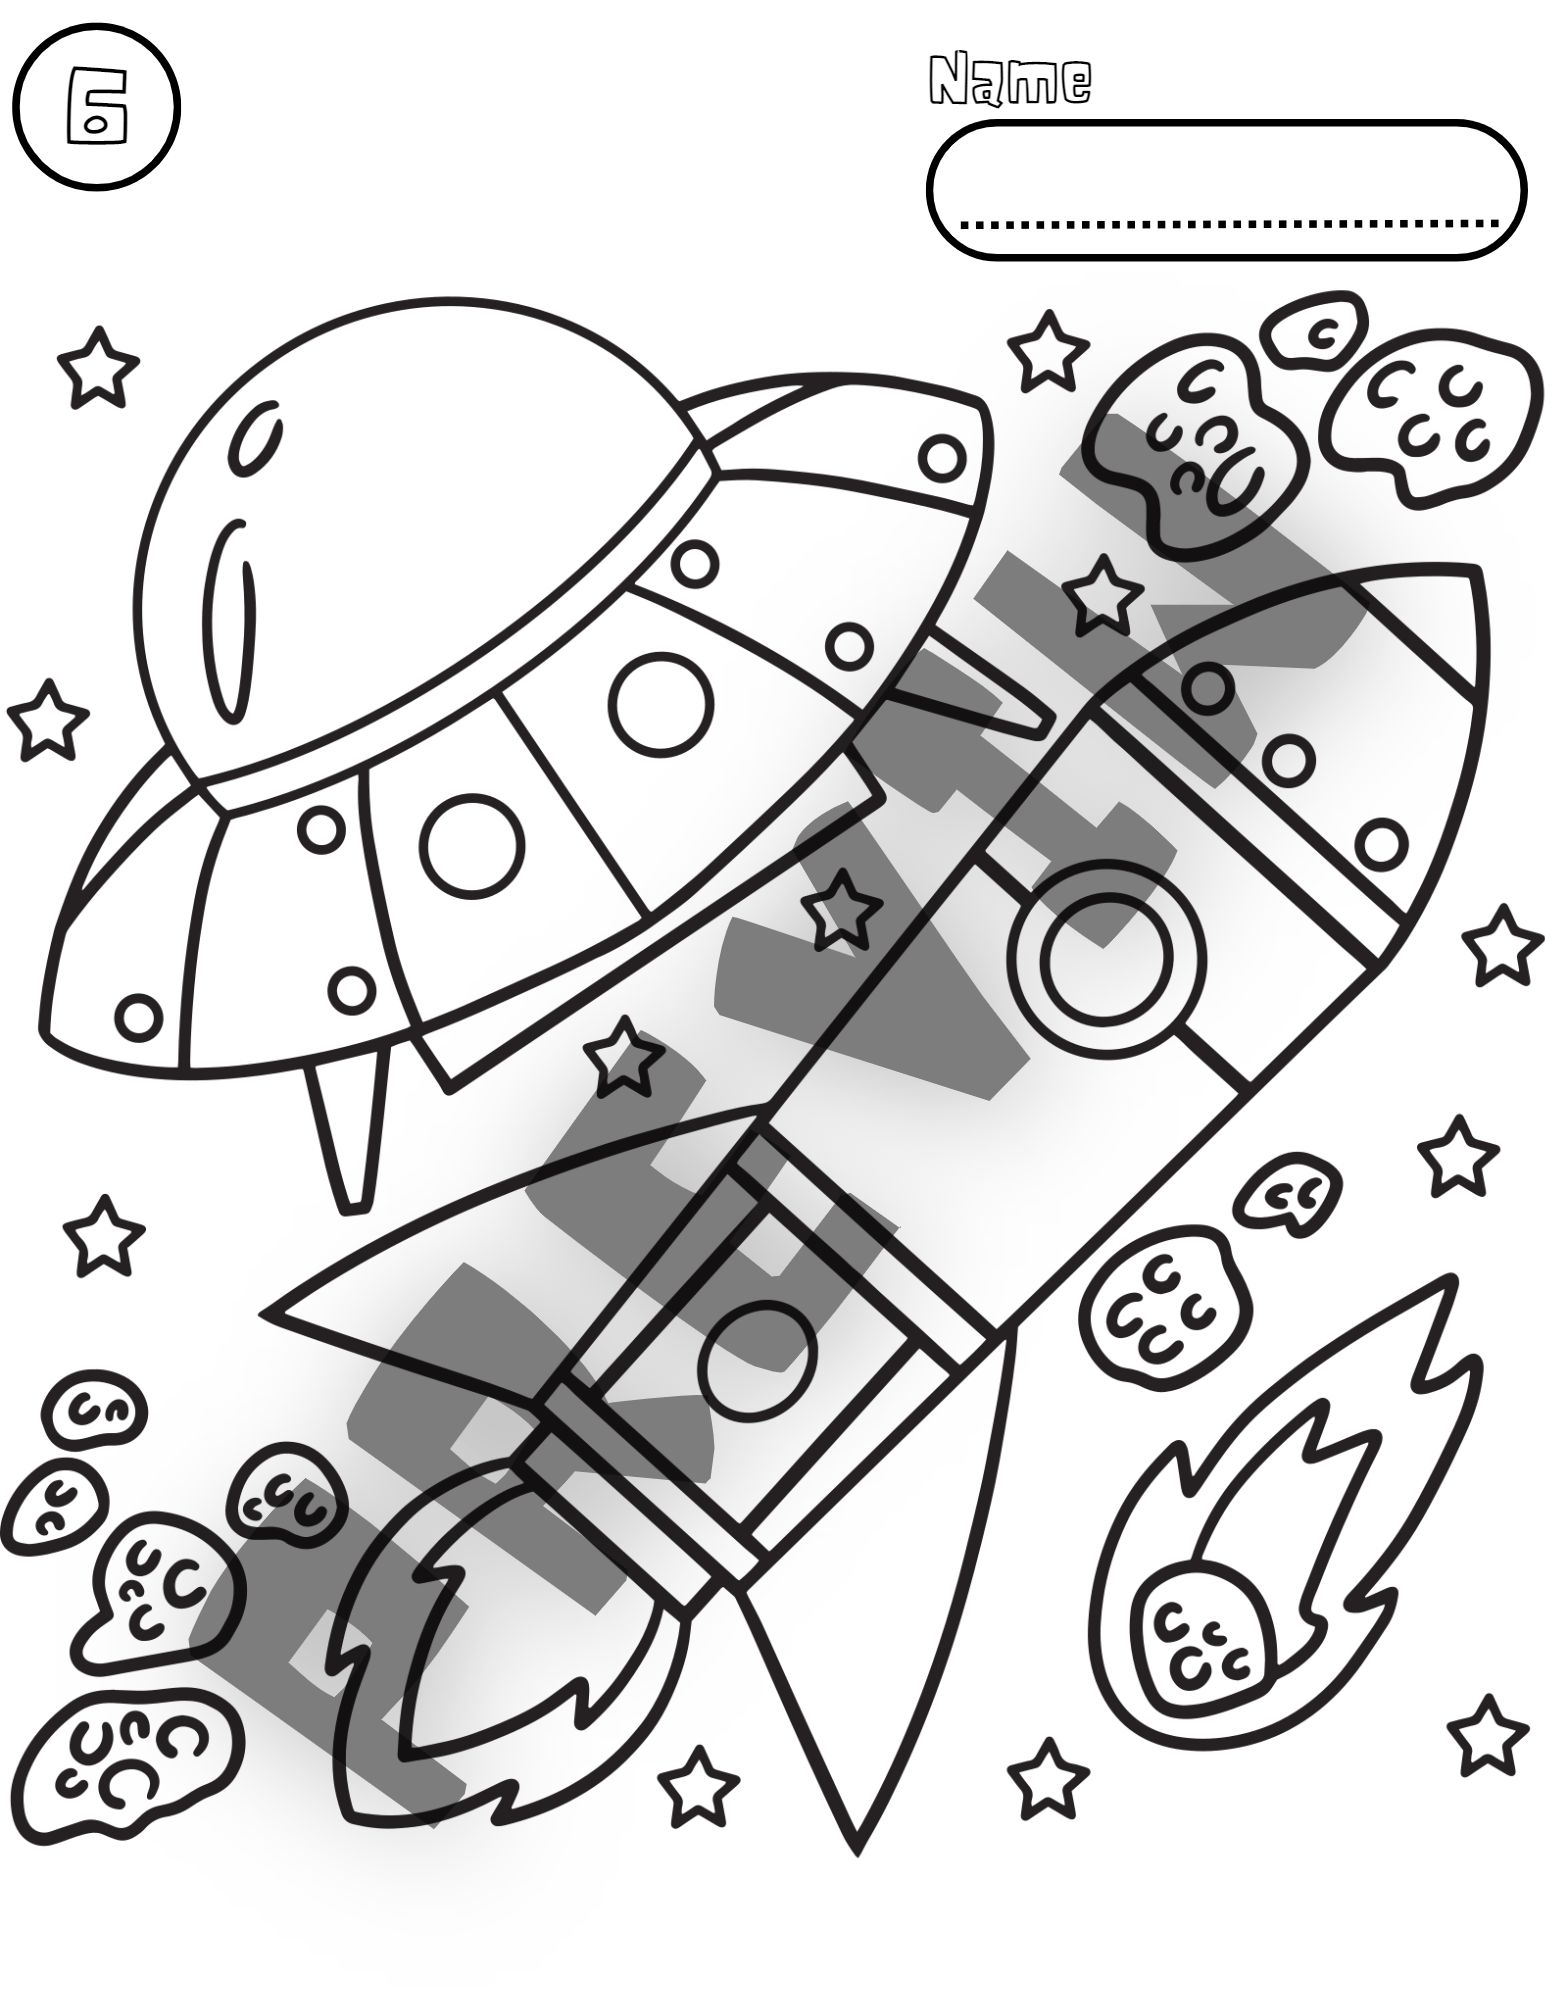 Space kids coloring pages astronaut ufo planets coloring pages v made by teachers